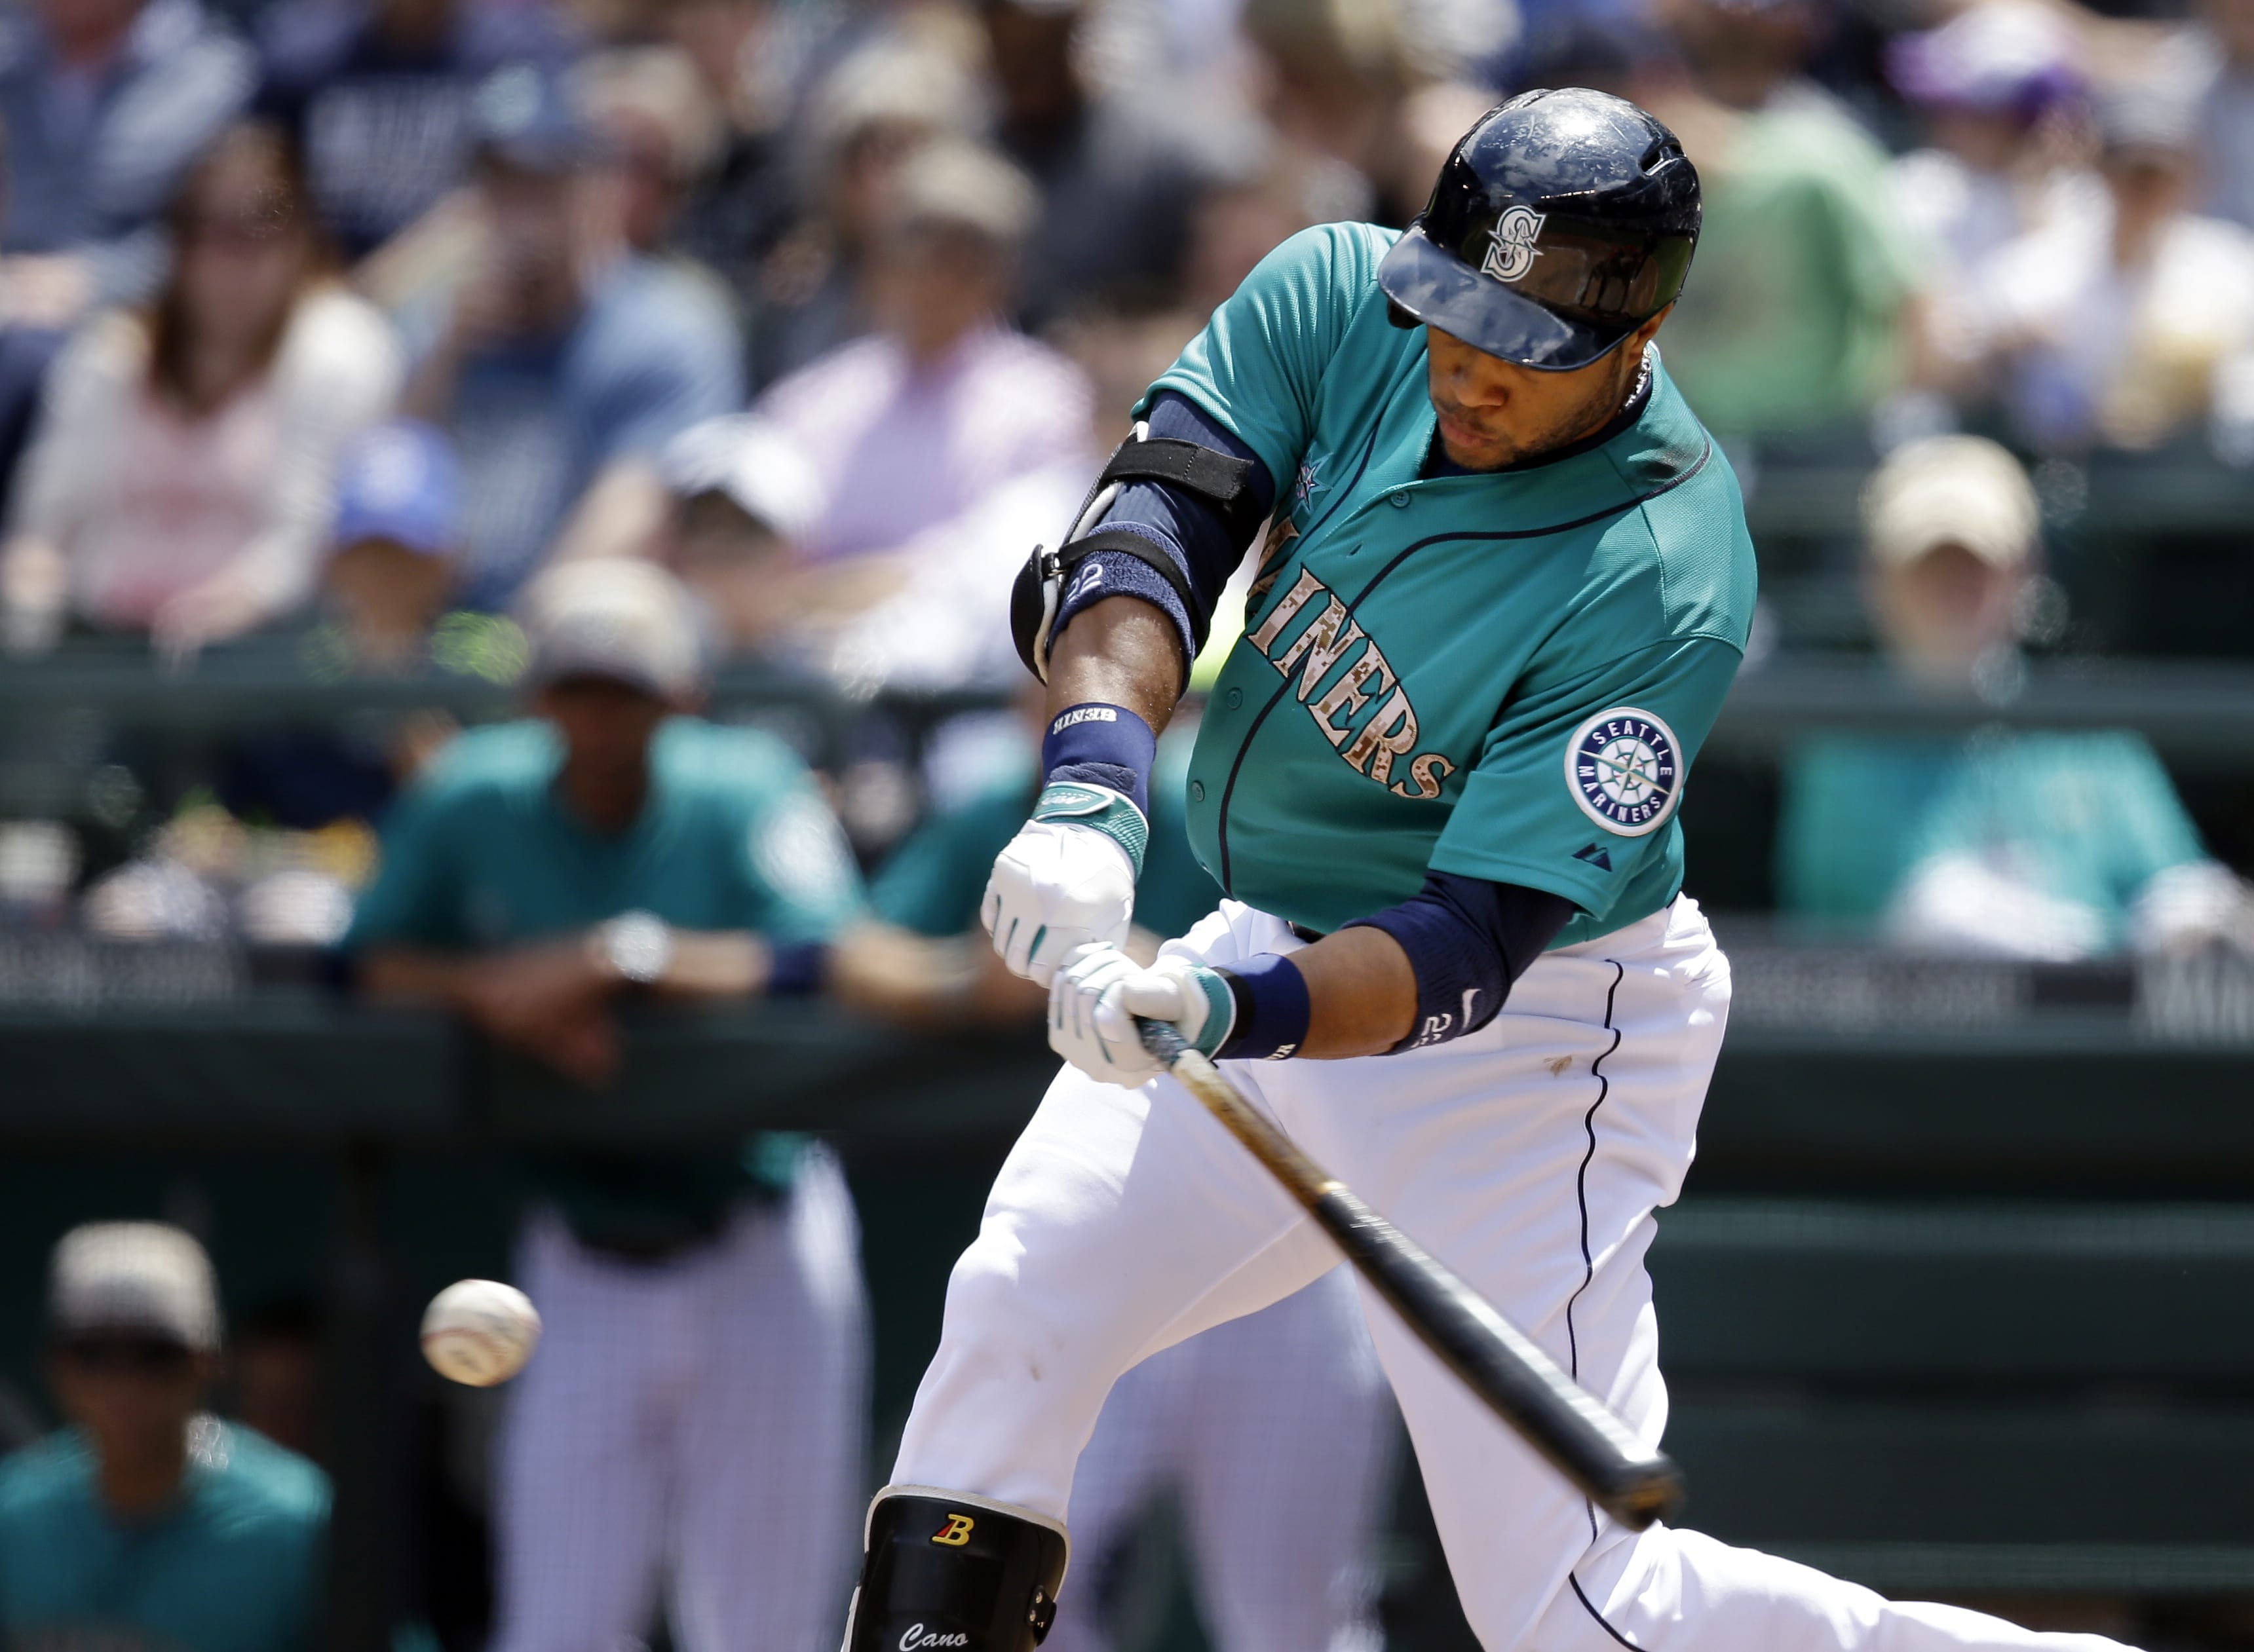 Seattle Mariners' Robinson Cano singles in a run against the Los Angeles Angels in the first inning of a baseball game Monday, May 26, 2014, in Seattle.